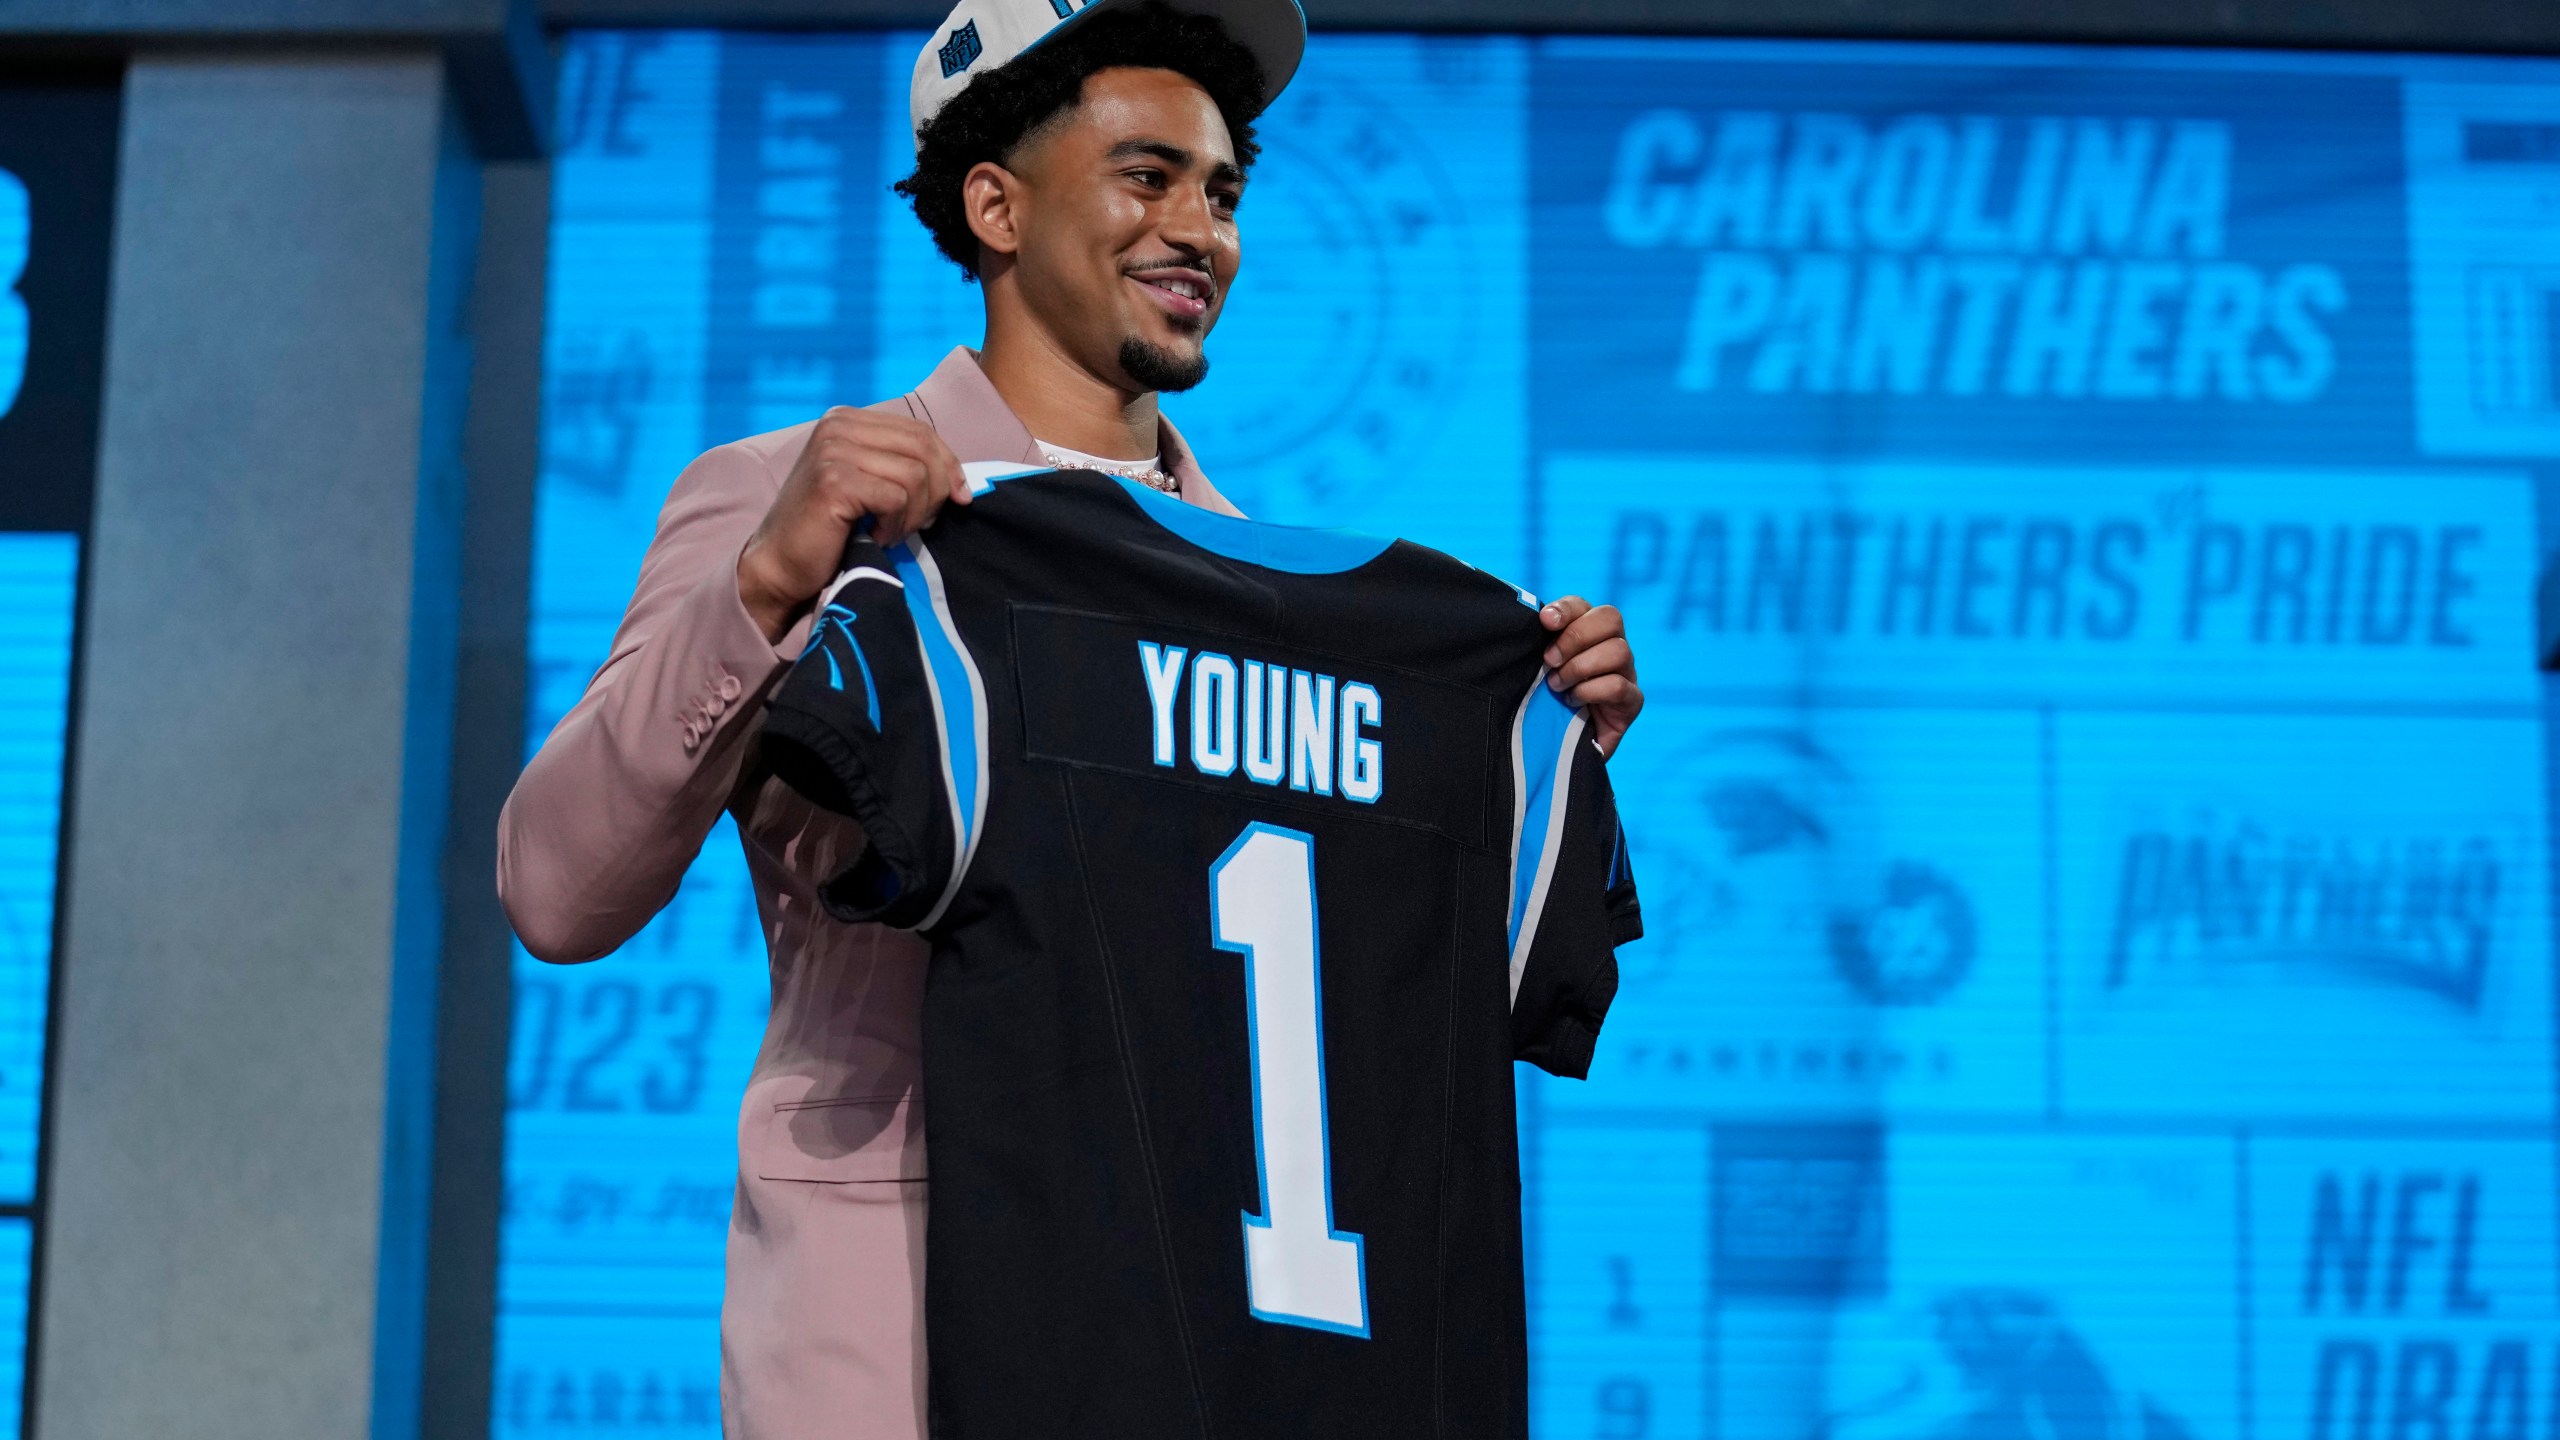 Alabama quarterback Bryce Young poses after being chosen by Carolina Panthers with the first overall pick during the first round of the NFL football draft, Thursday, April 27, 2023, in Kansas City, Mo. (AP Photo/Jeff Roberson)